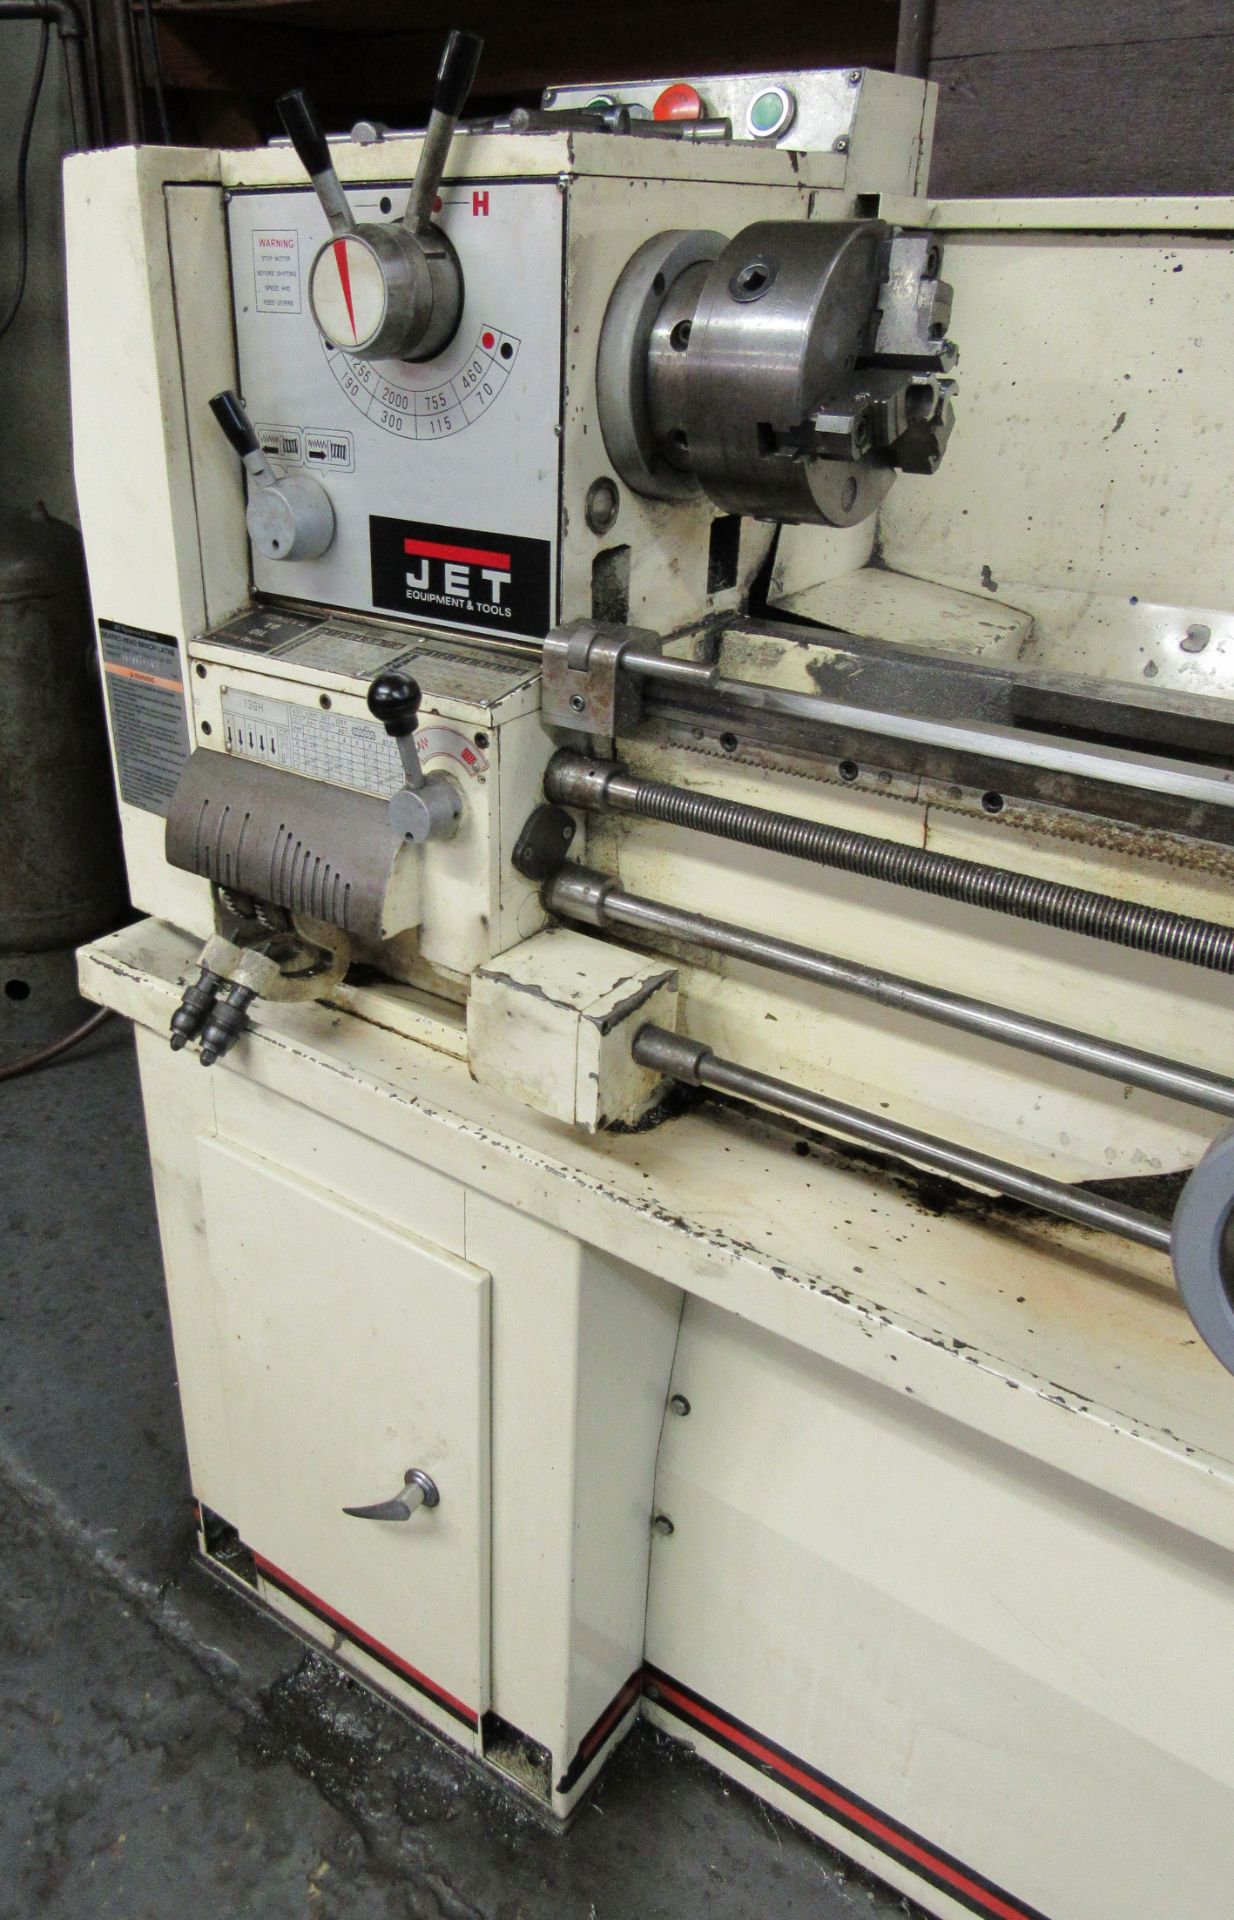 Jet Mod.GHB-1340 13"/18" x 40" Geared Gap Lathe - New 2000, Spindle Speeds 70 - 2000 RPM, 18-3/4" - Image 3 of 5